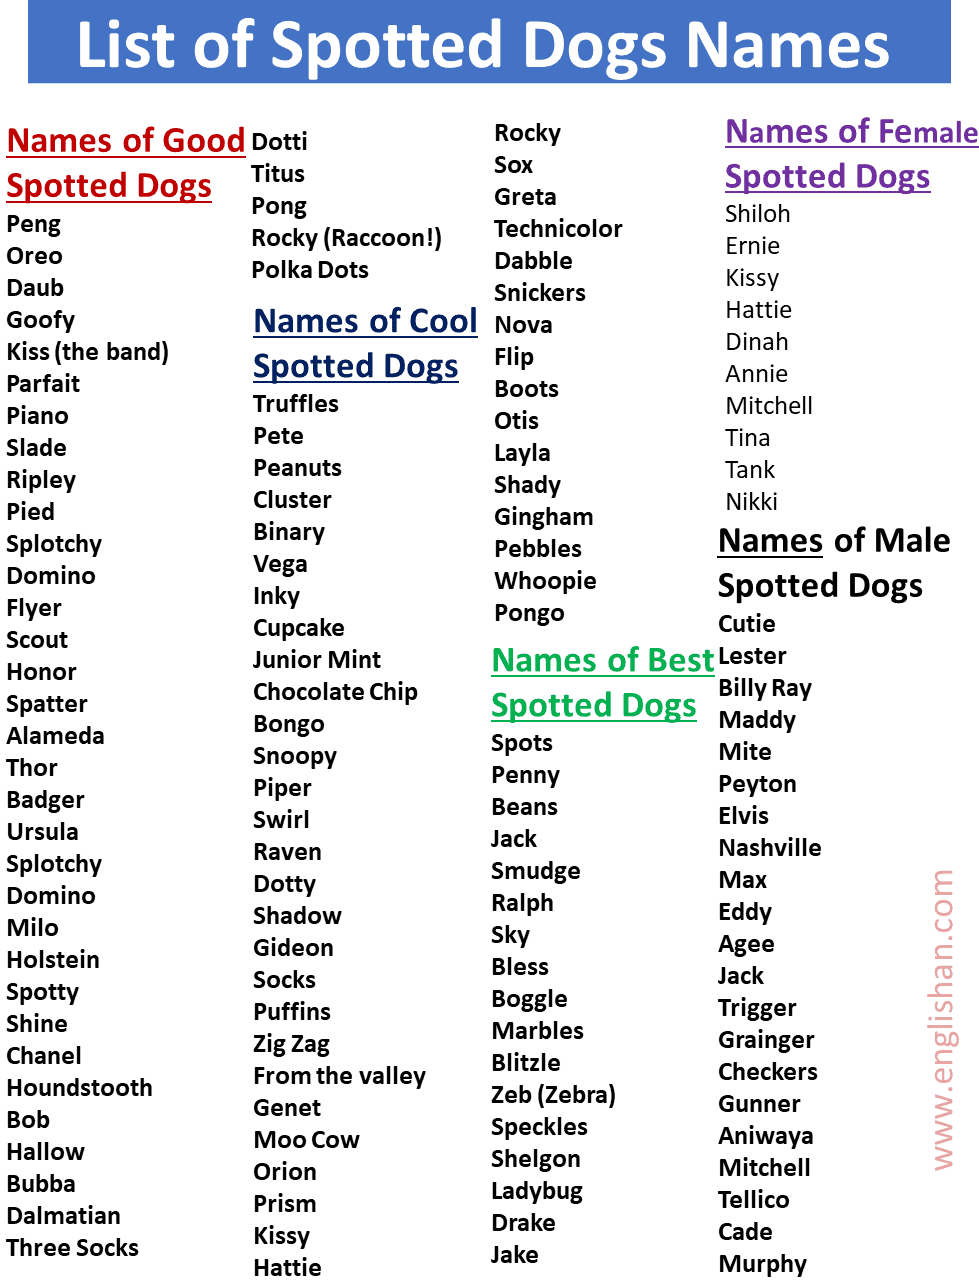 300+ List of Spotted Dog Names in English